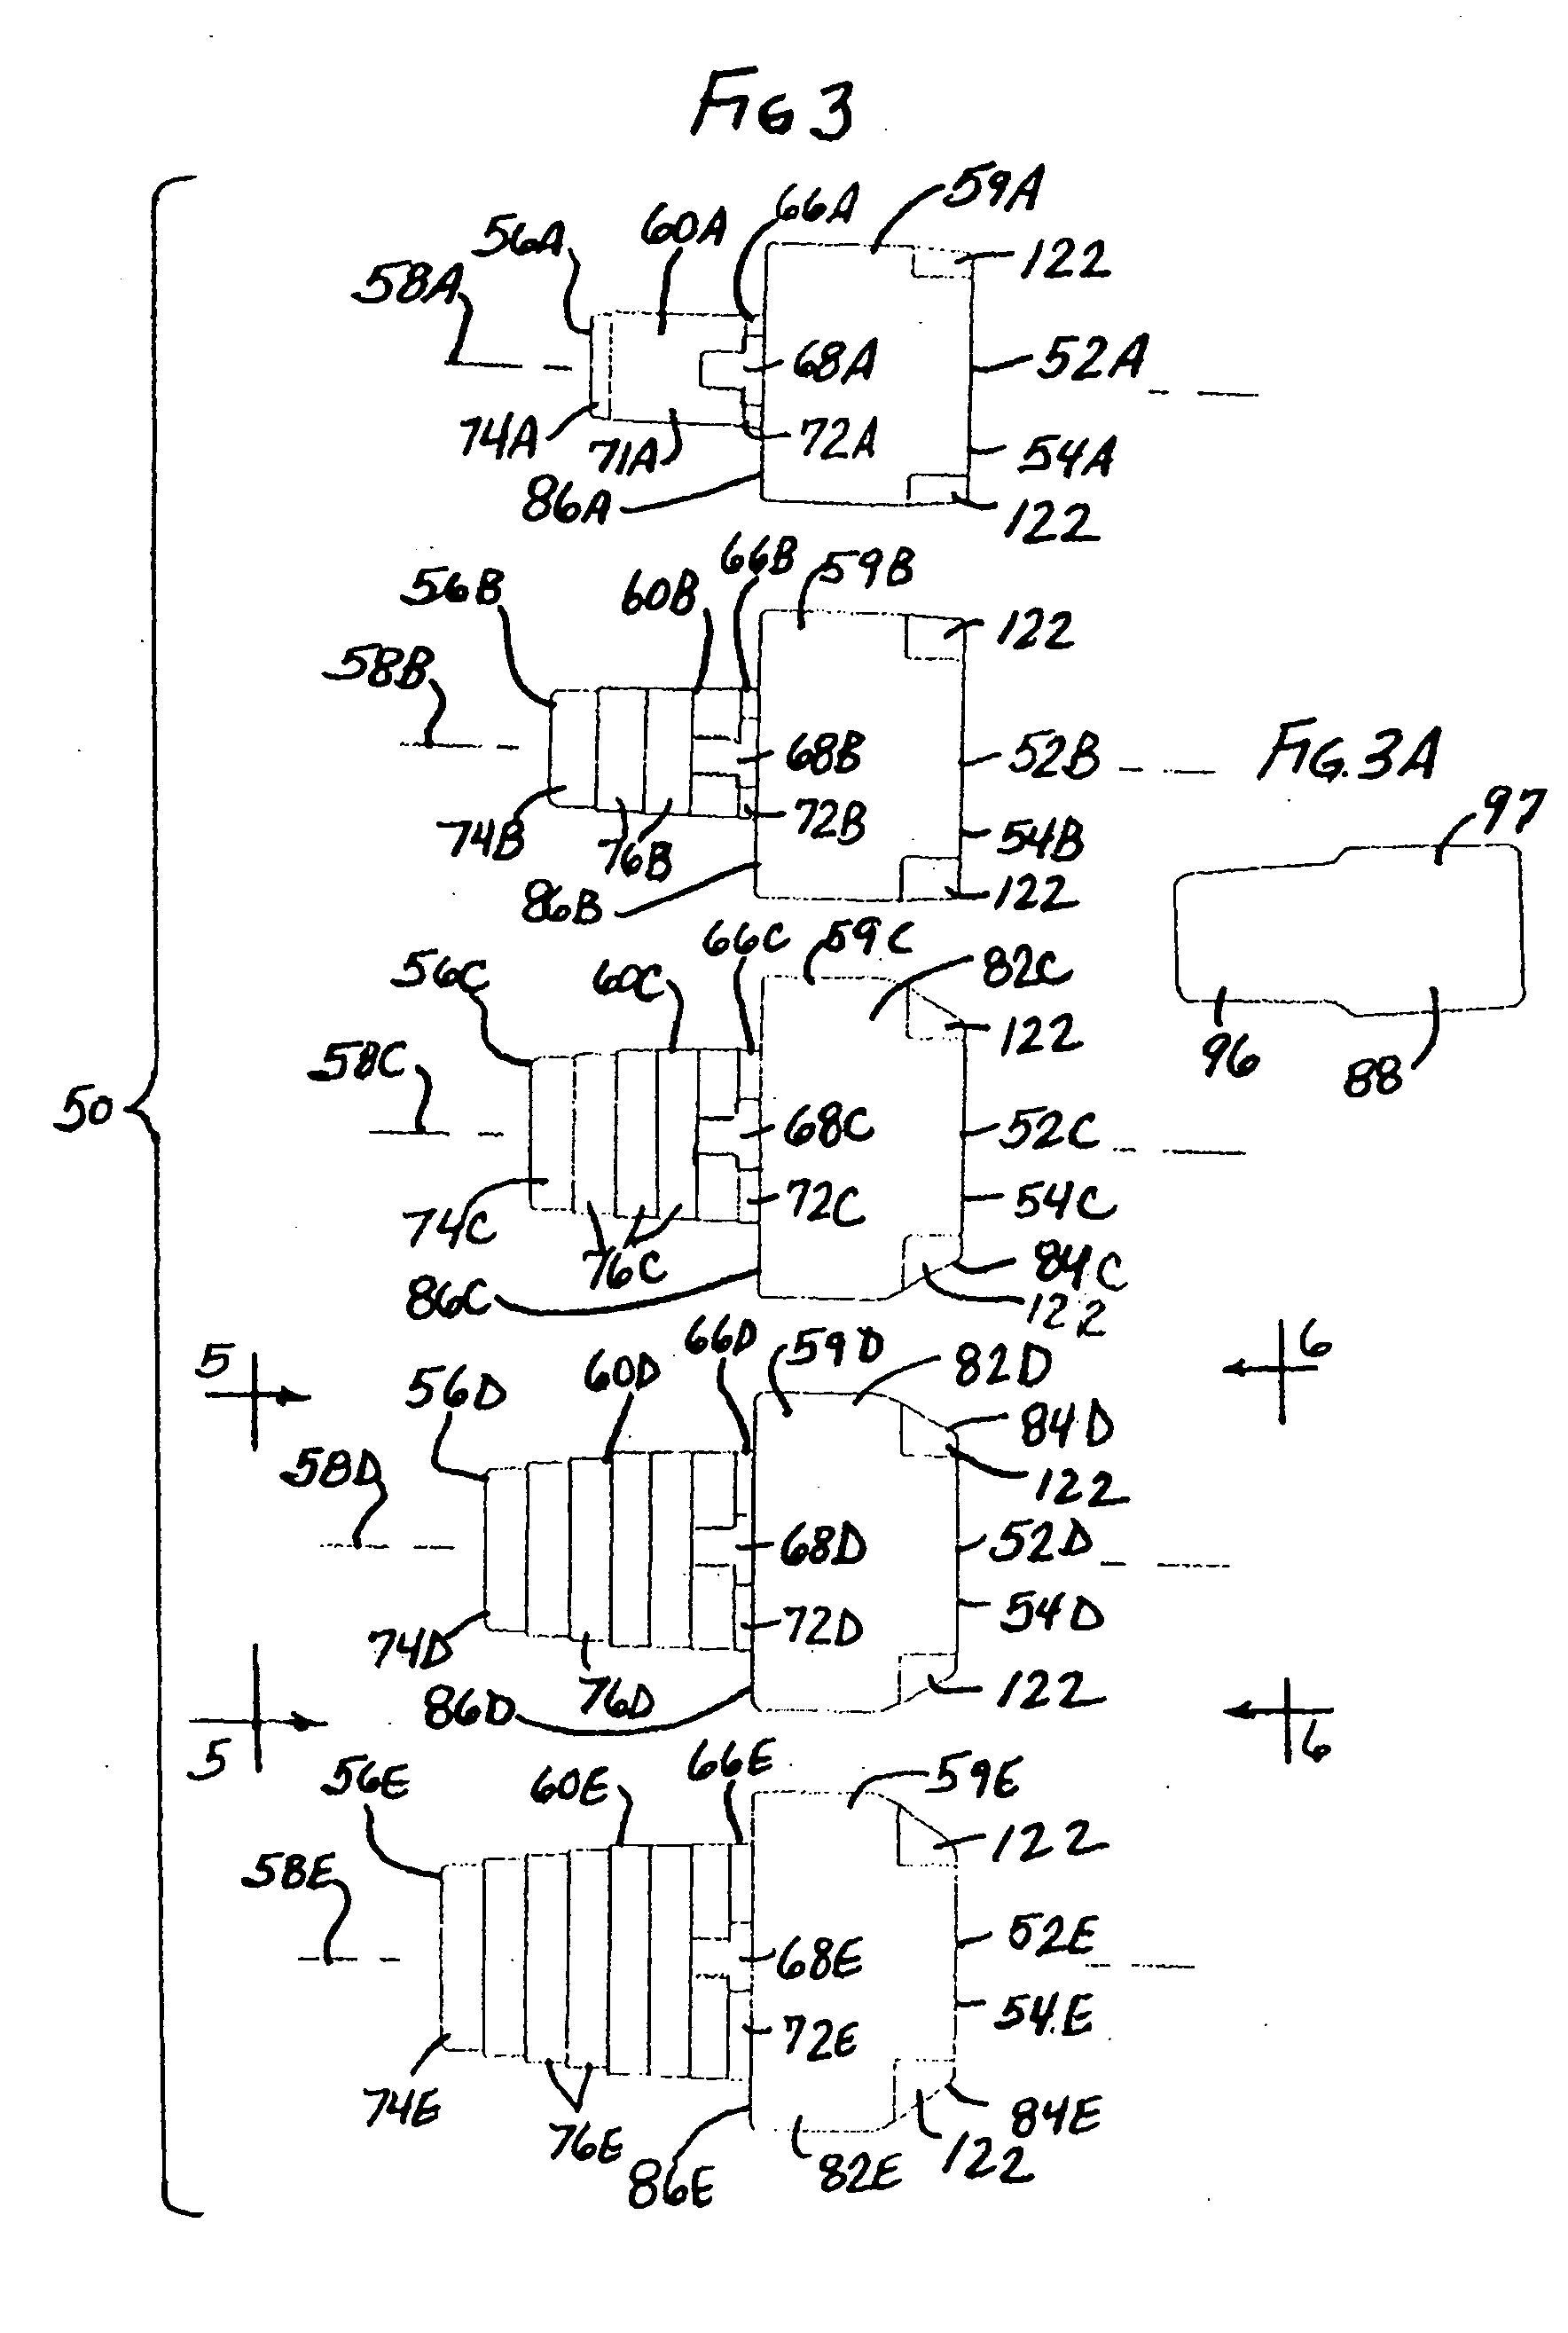 Modular implant system and method with diaphyseal implant and adapter